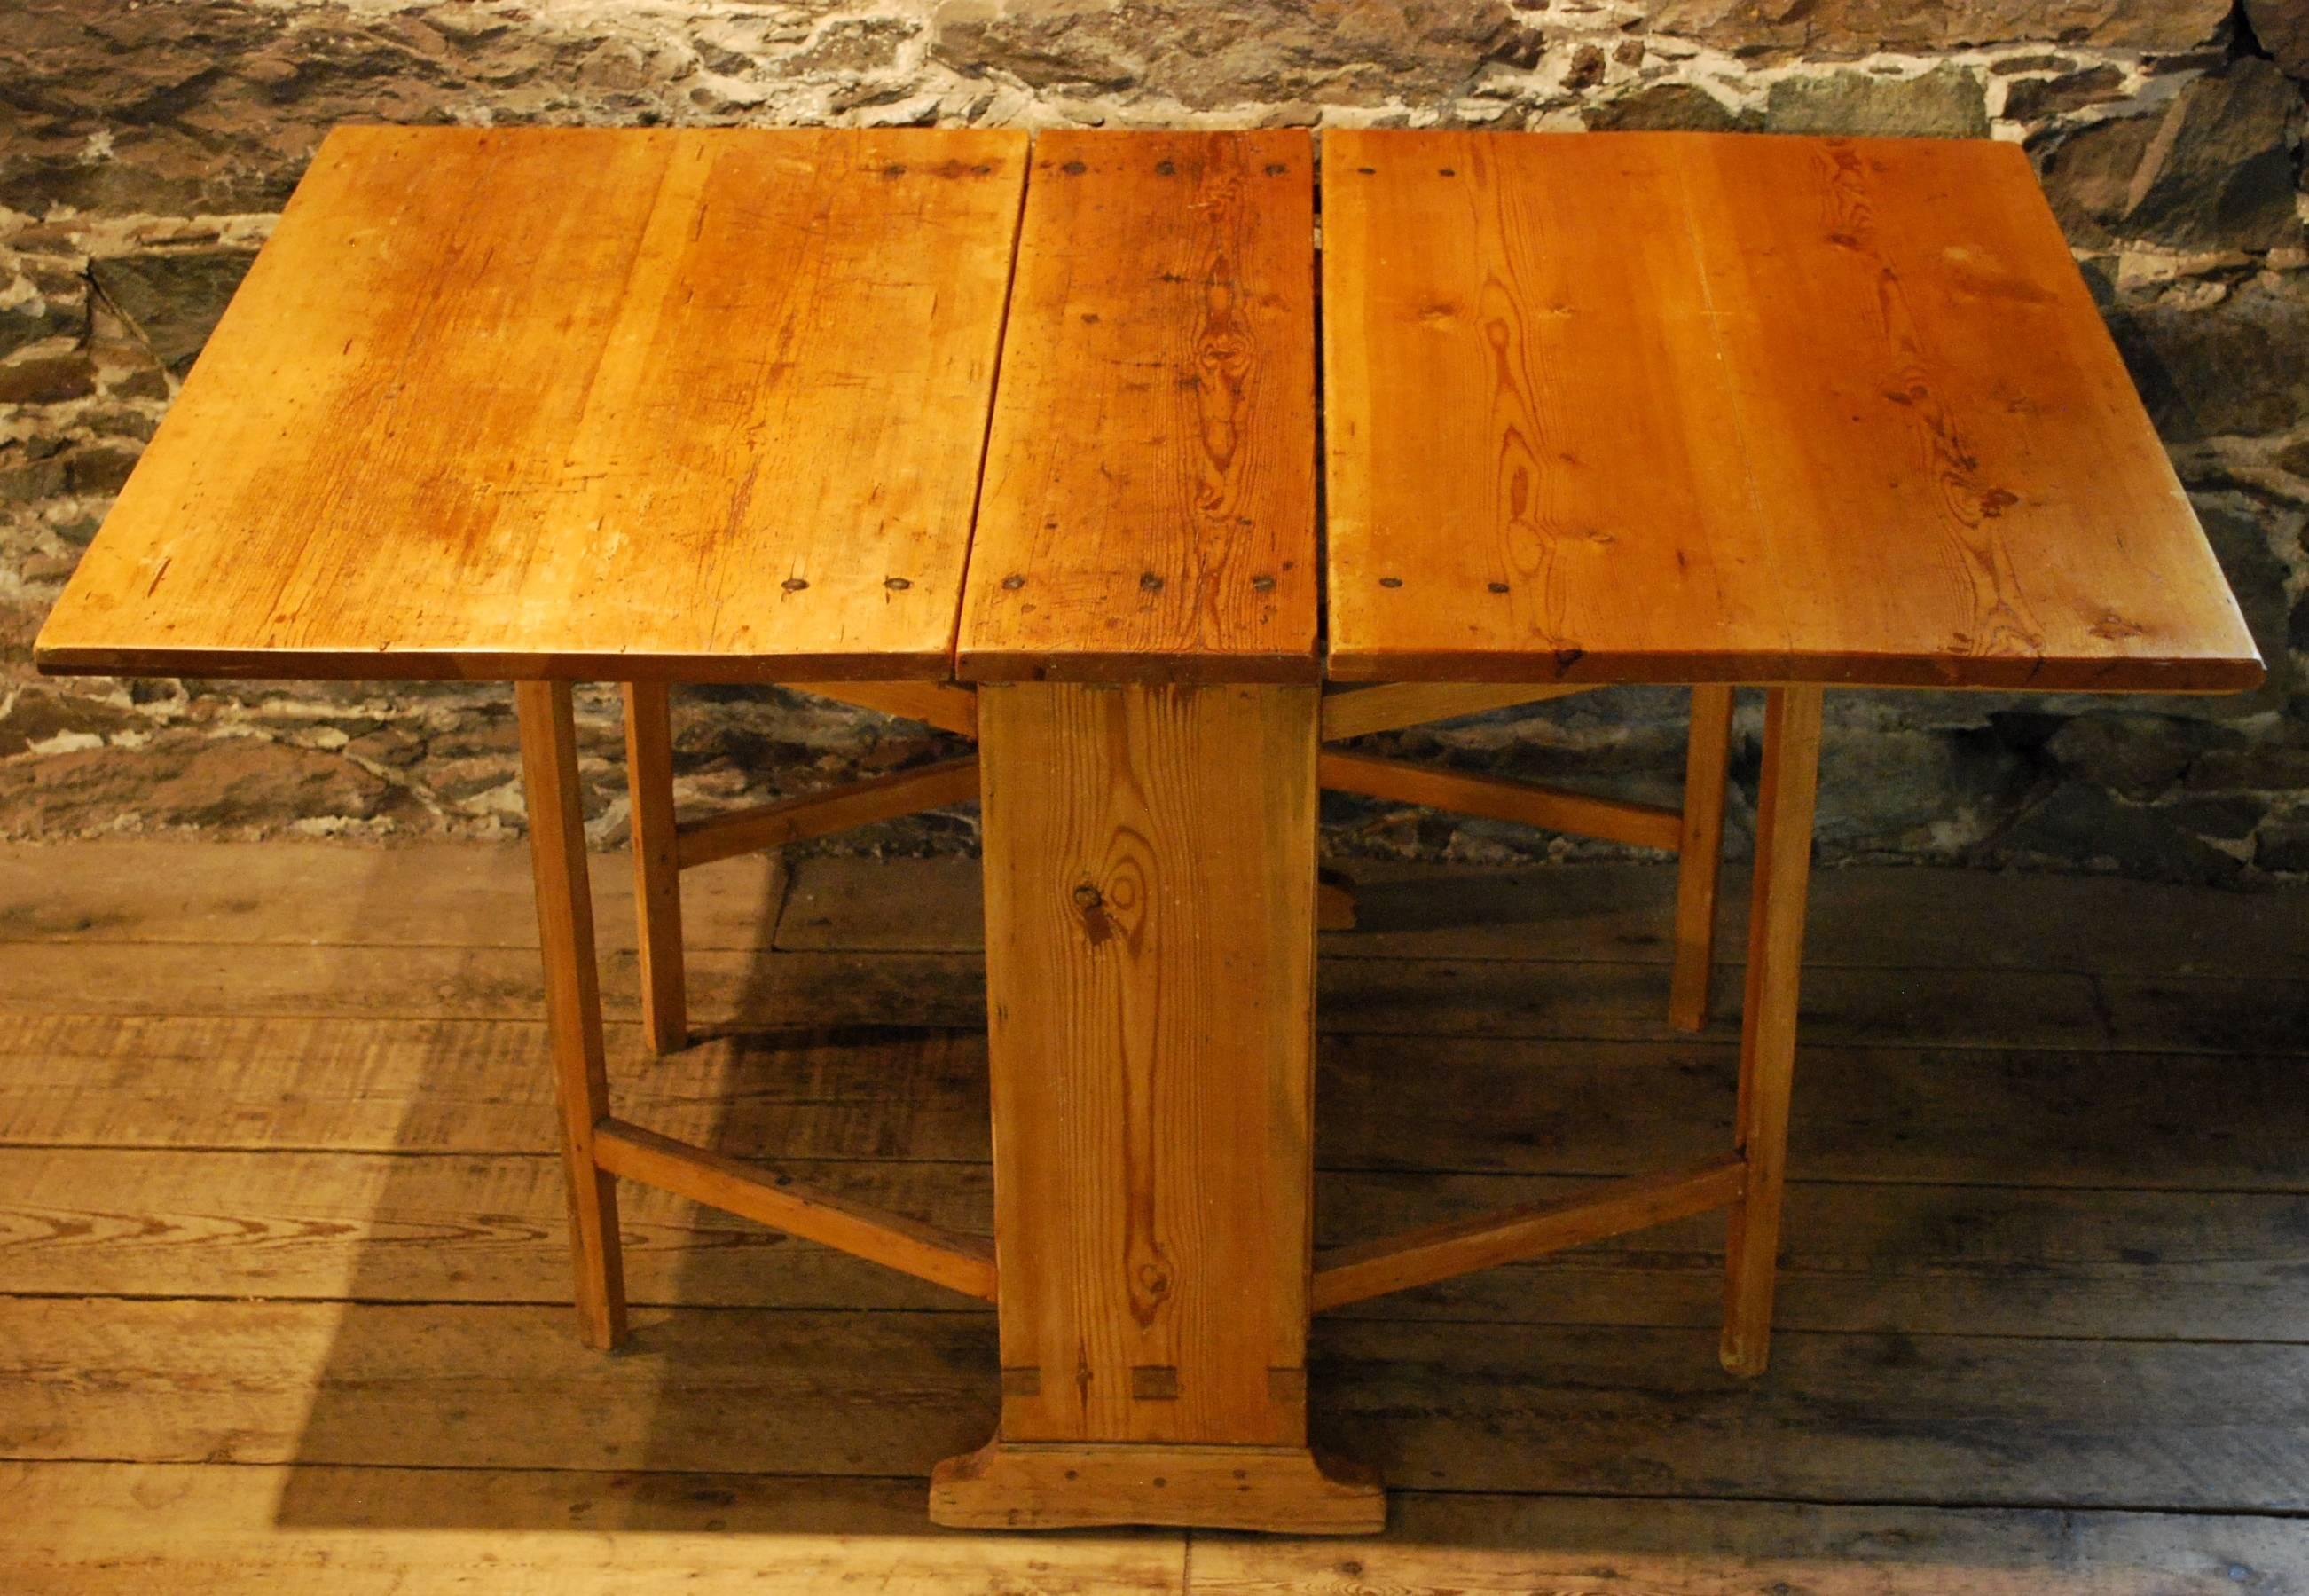 Antique Swedish Gate Leg Table, circa 1830 'Four Tables in One' For Sale 3